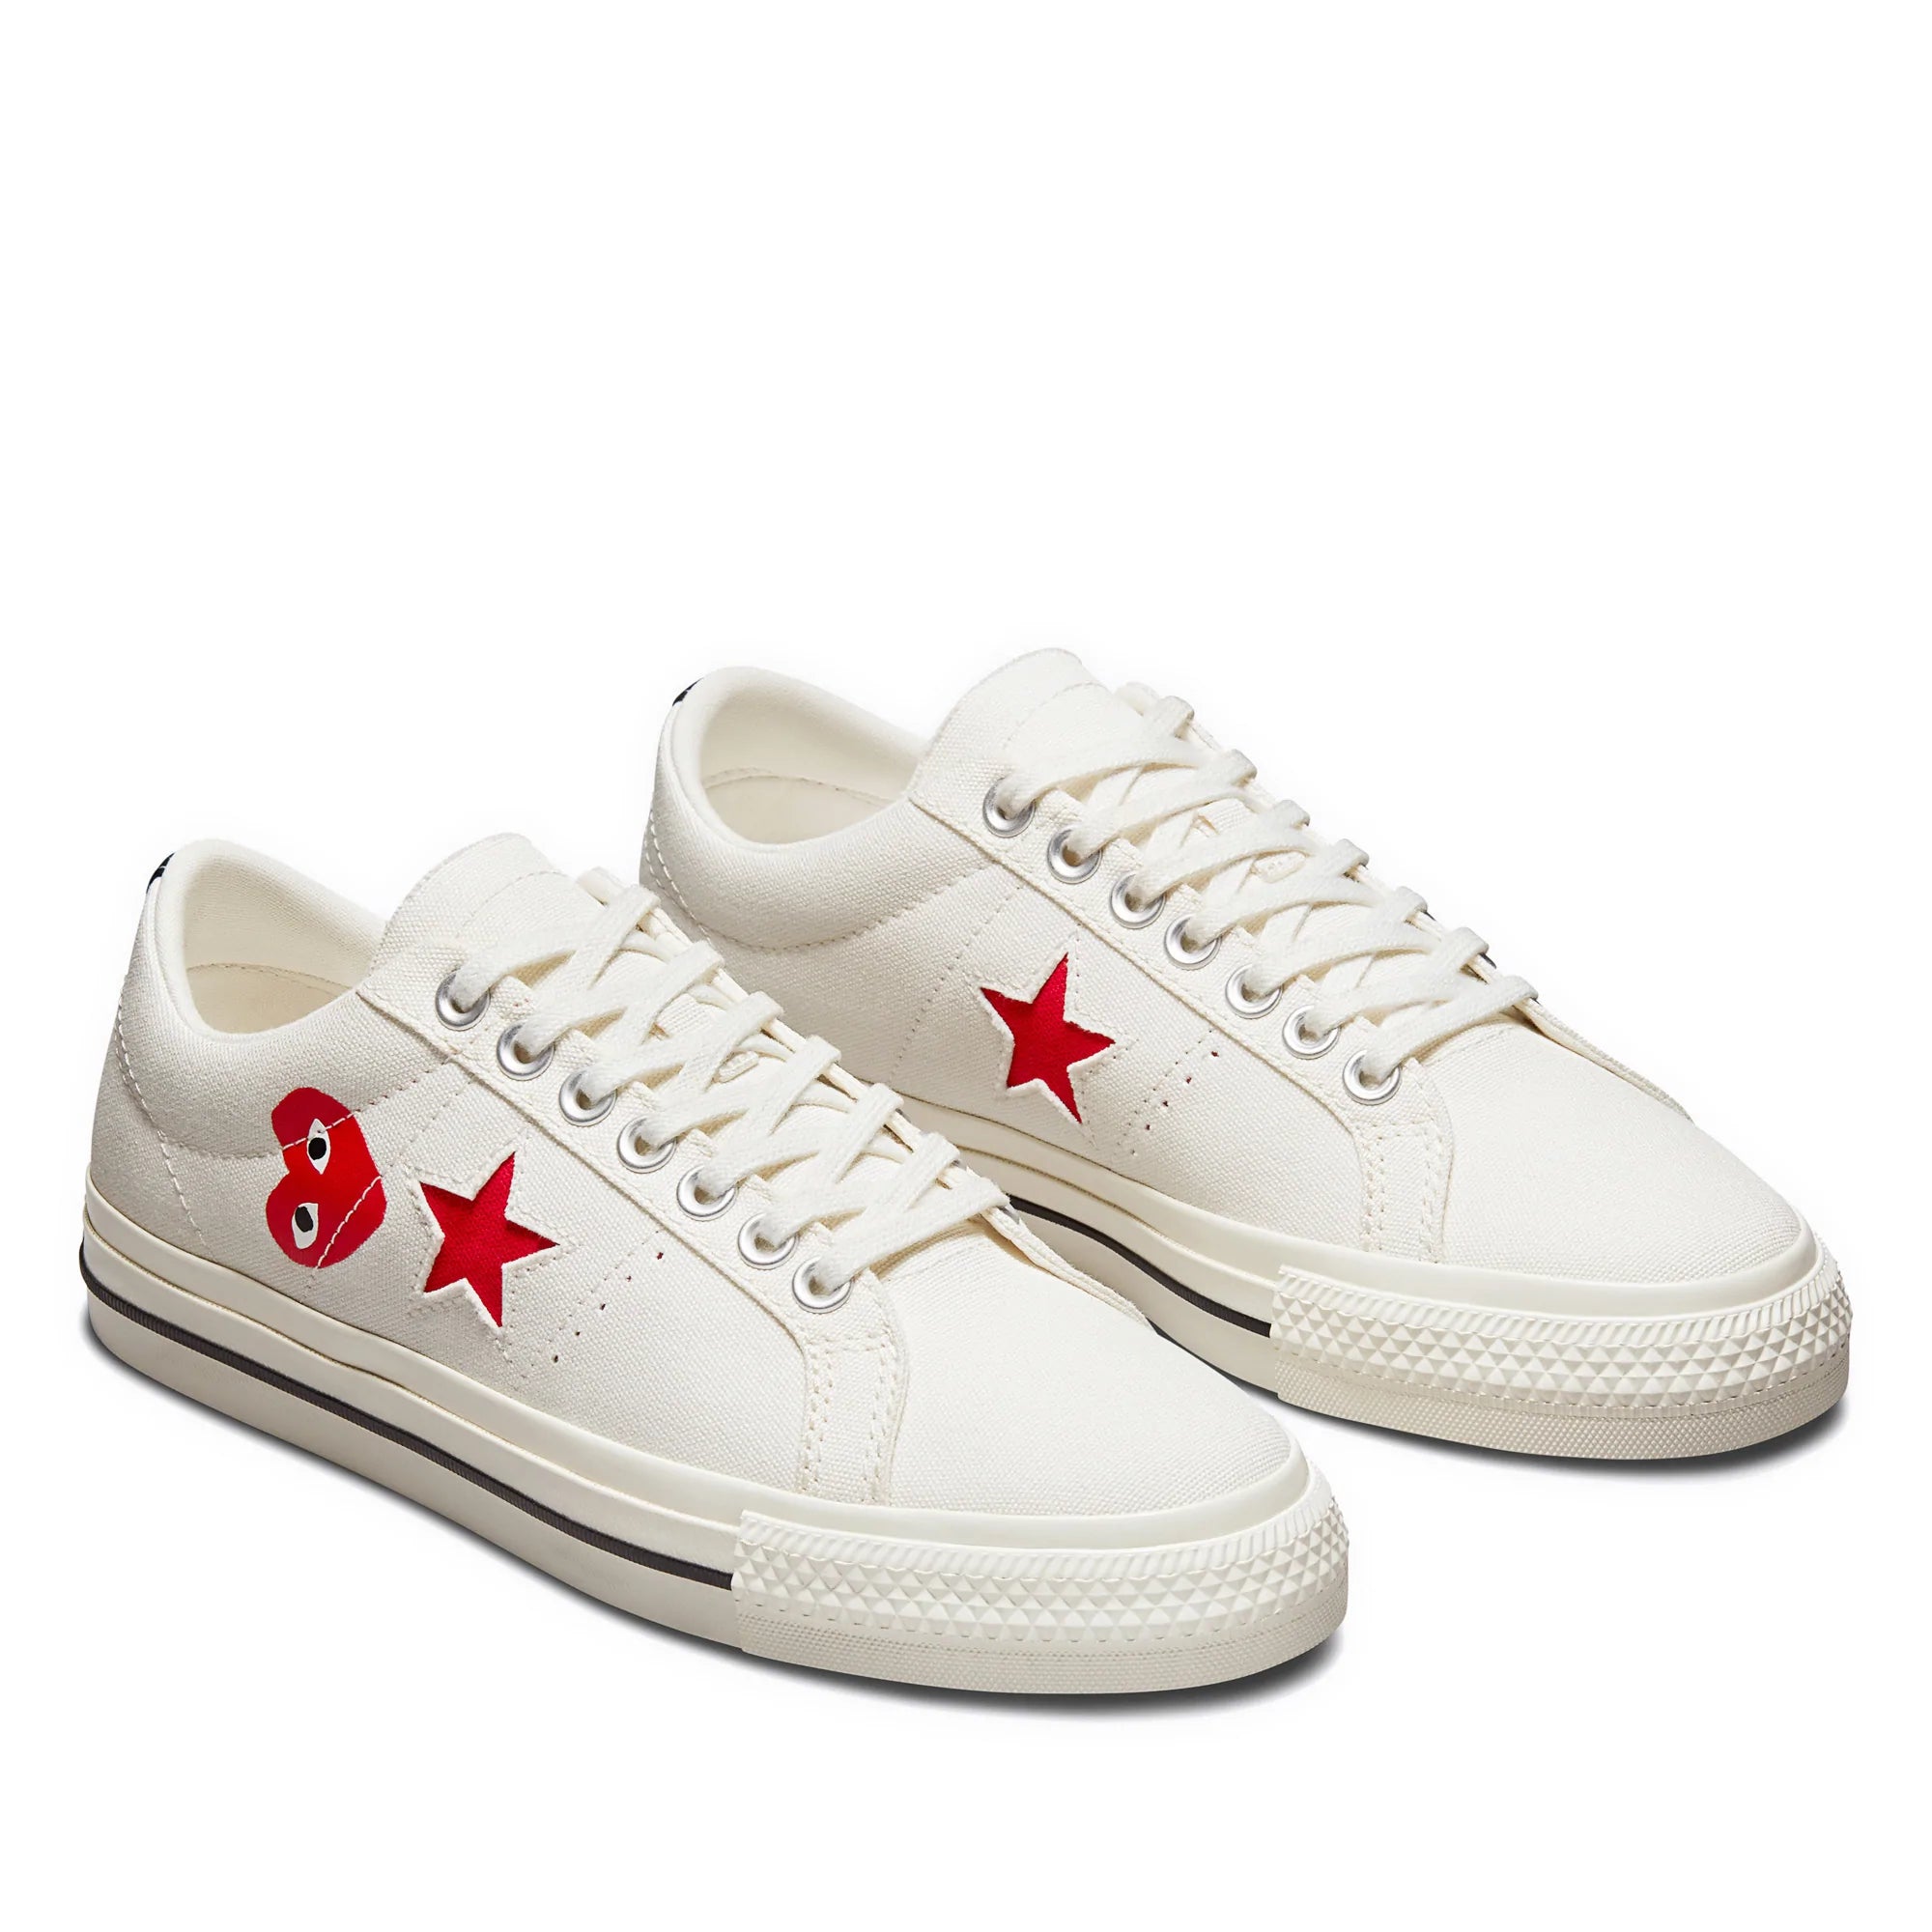 Converse One Star Low Top (White)